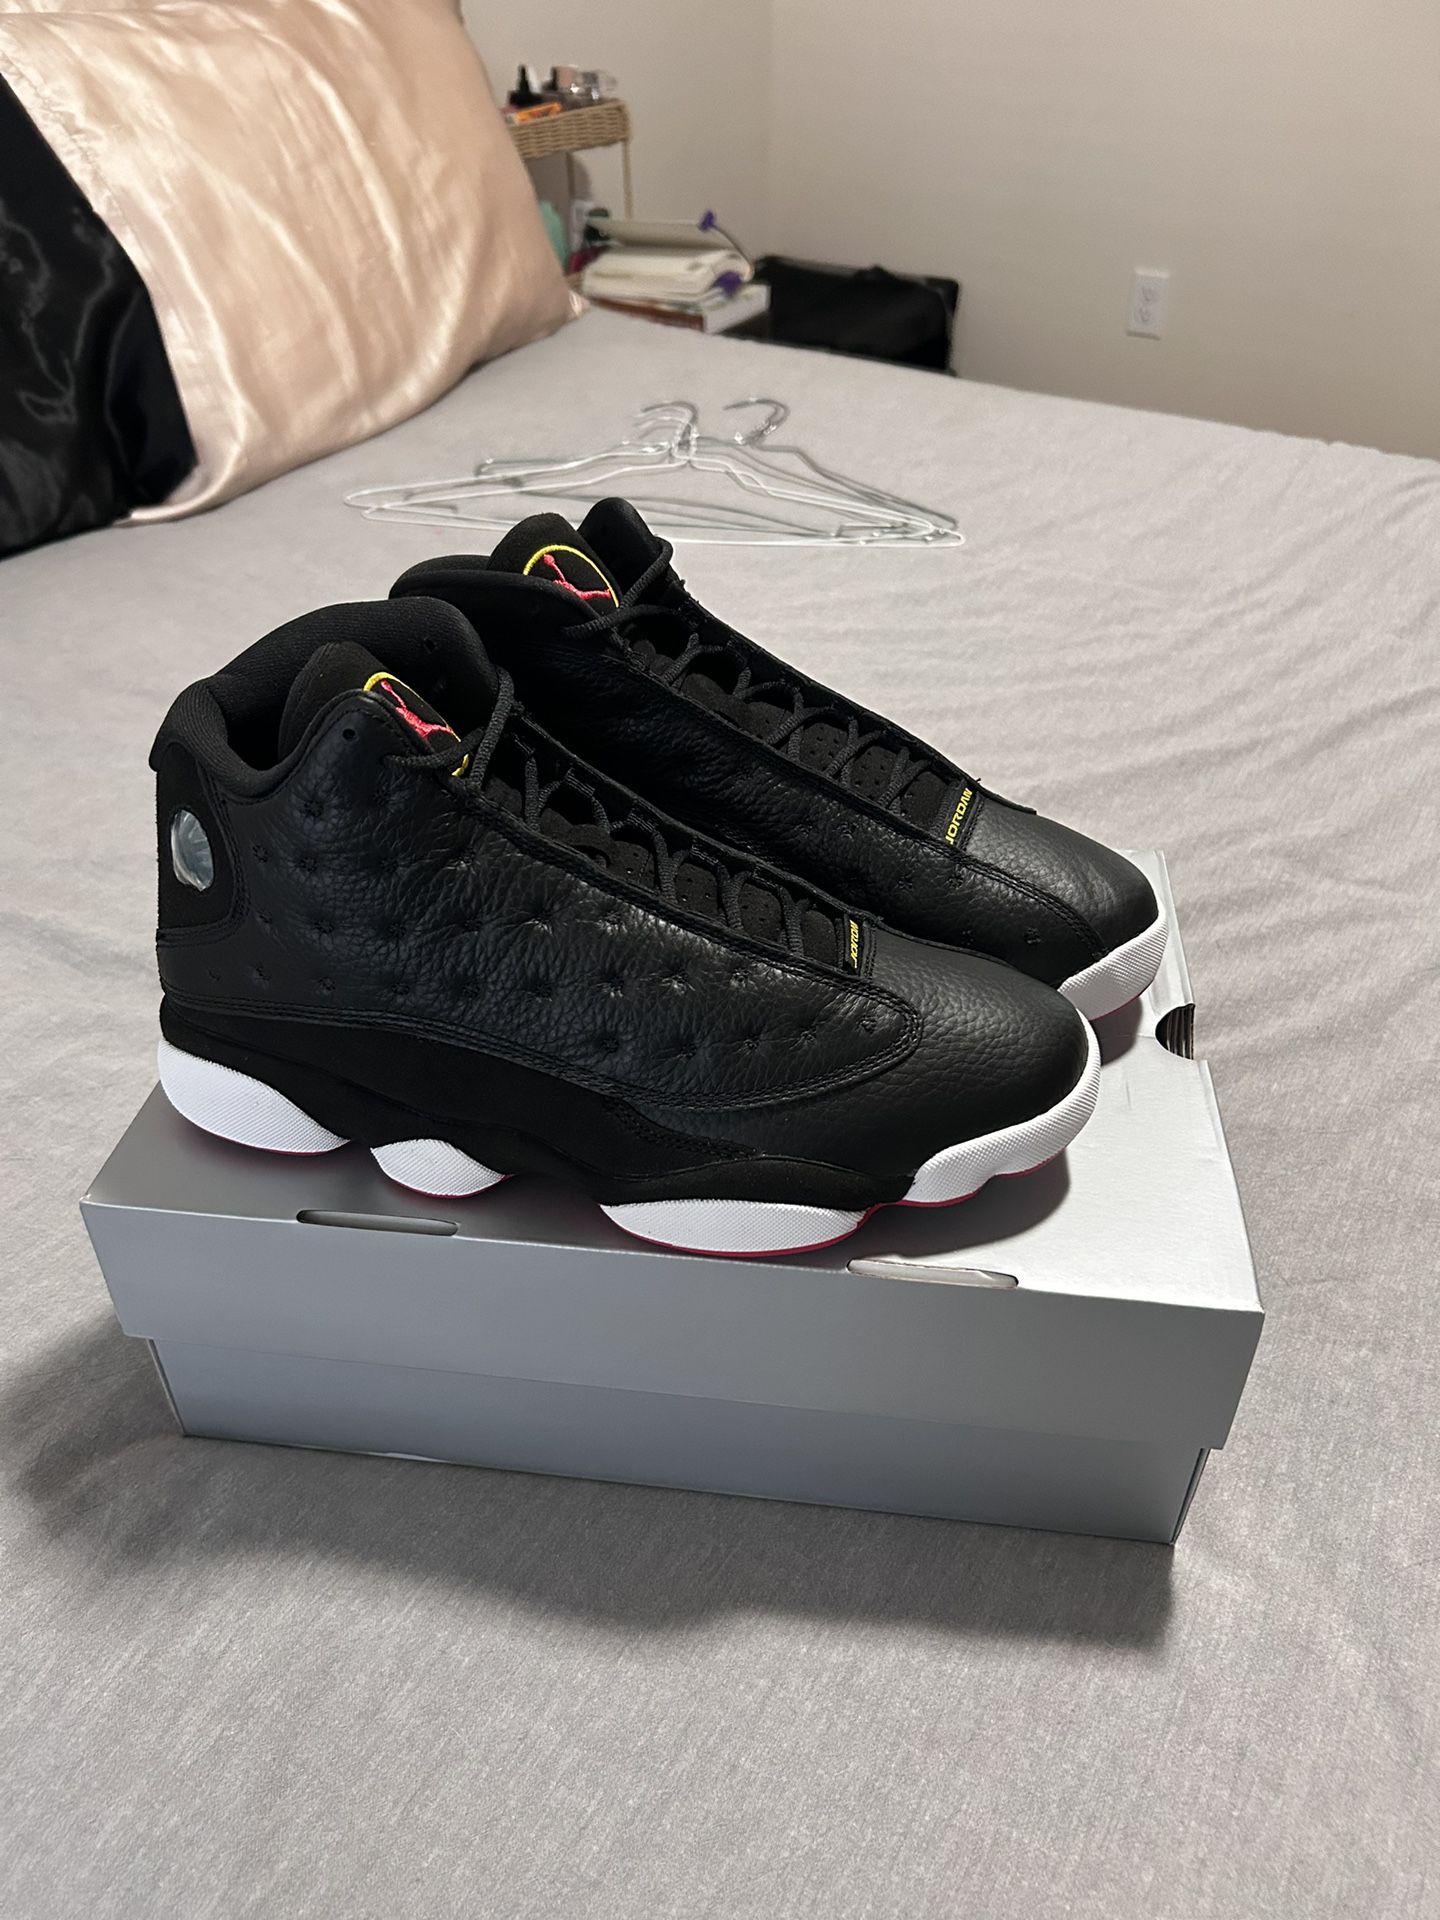 Playoff 13s Size 11